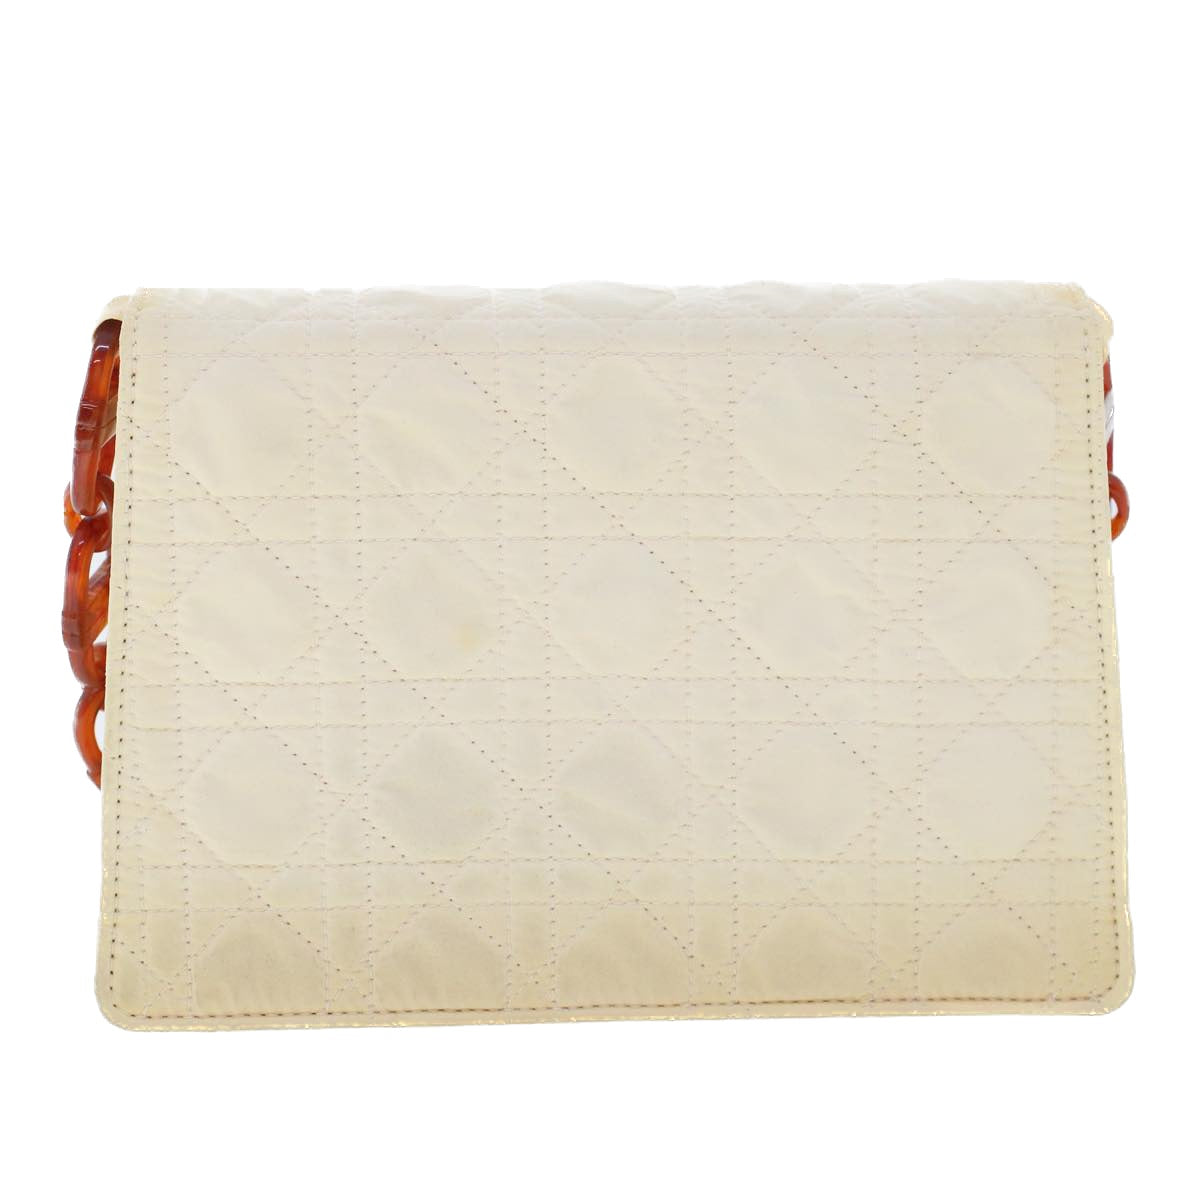 Christian Dior Quilted Canage Shoulder Bag Nylon White Auth 49813